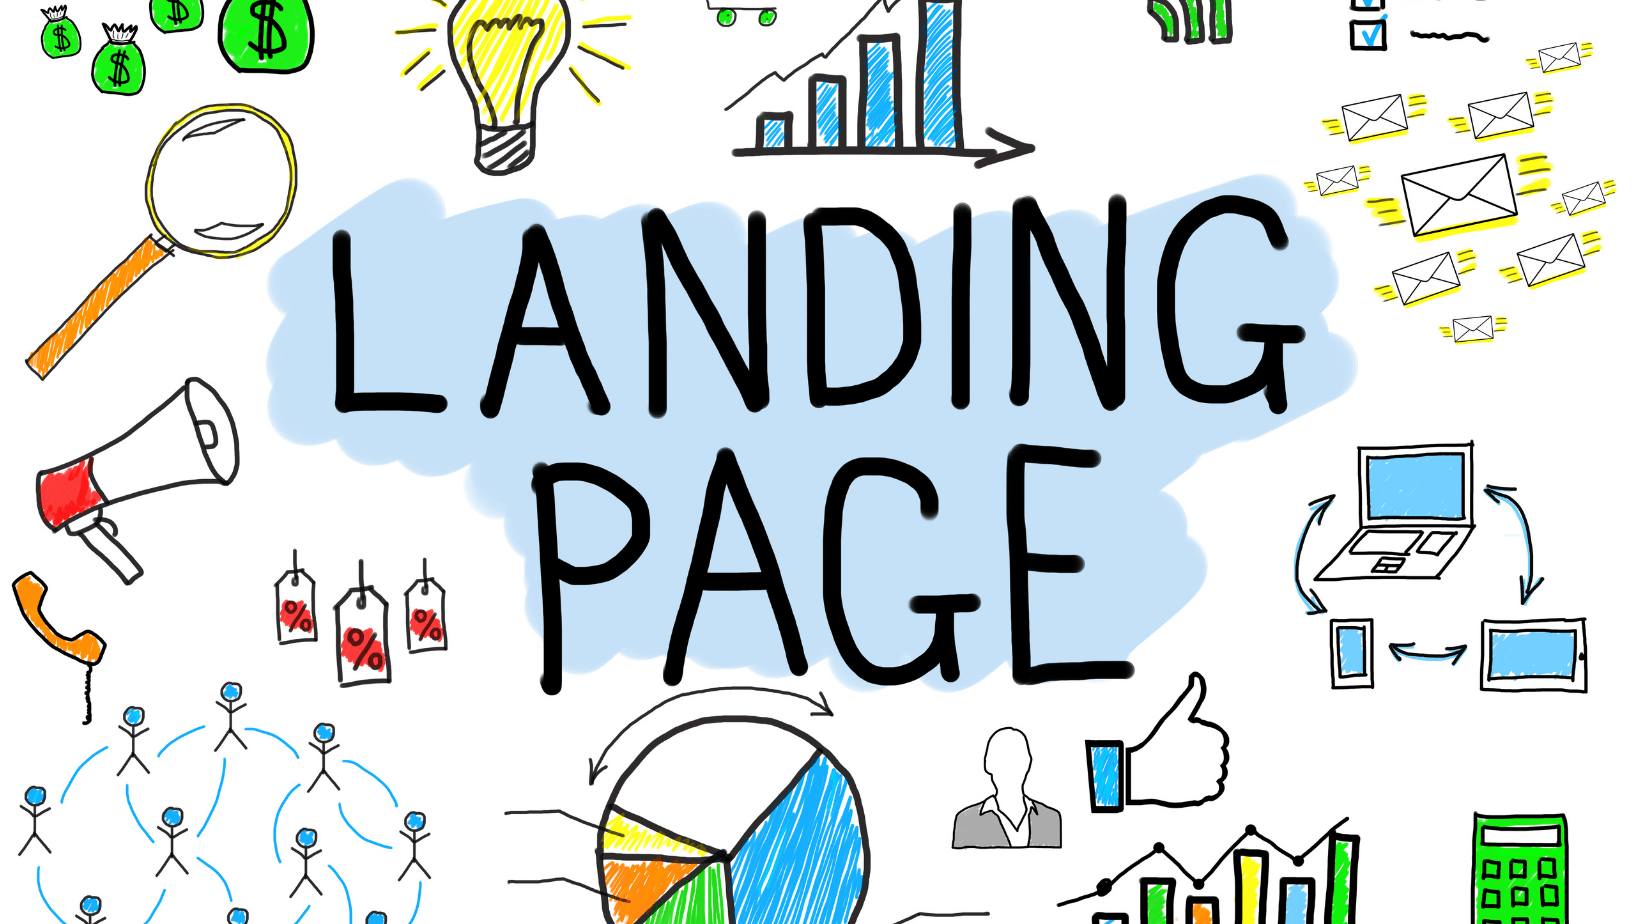 What Exactly Is a Landing Page?